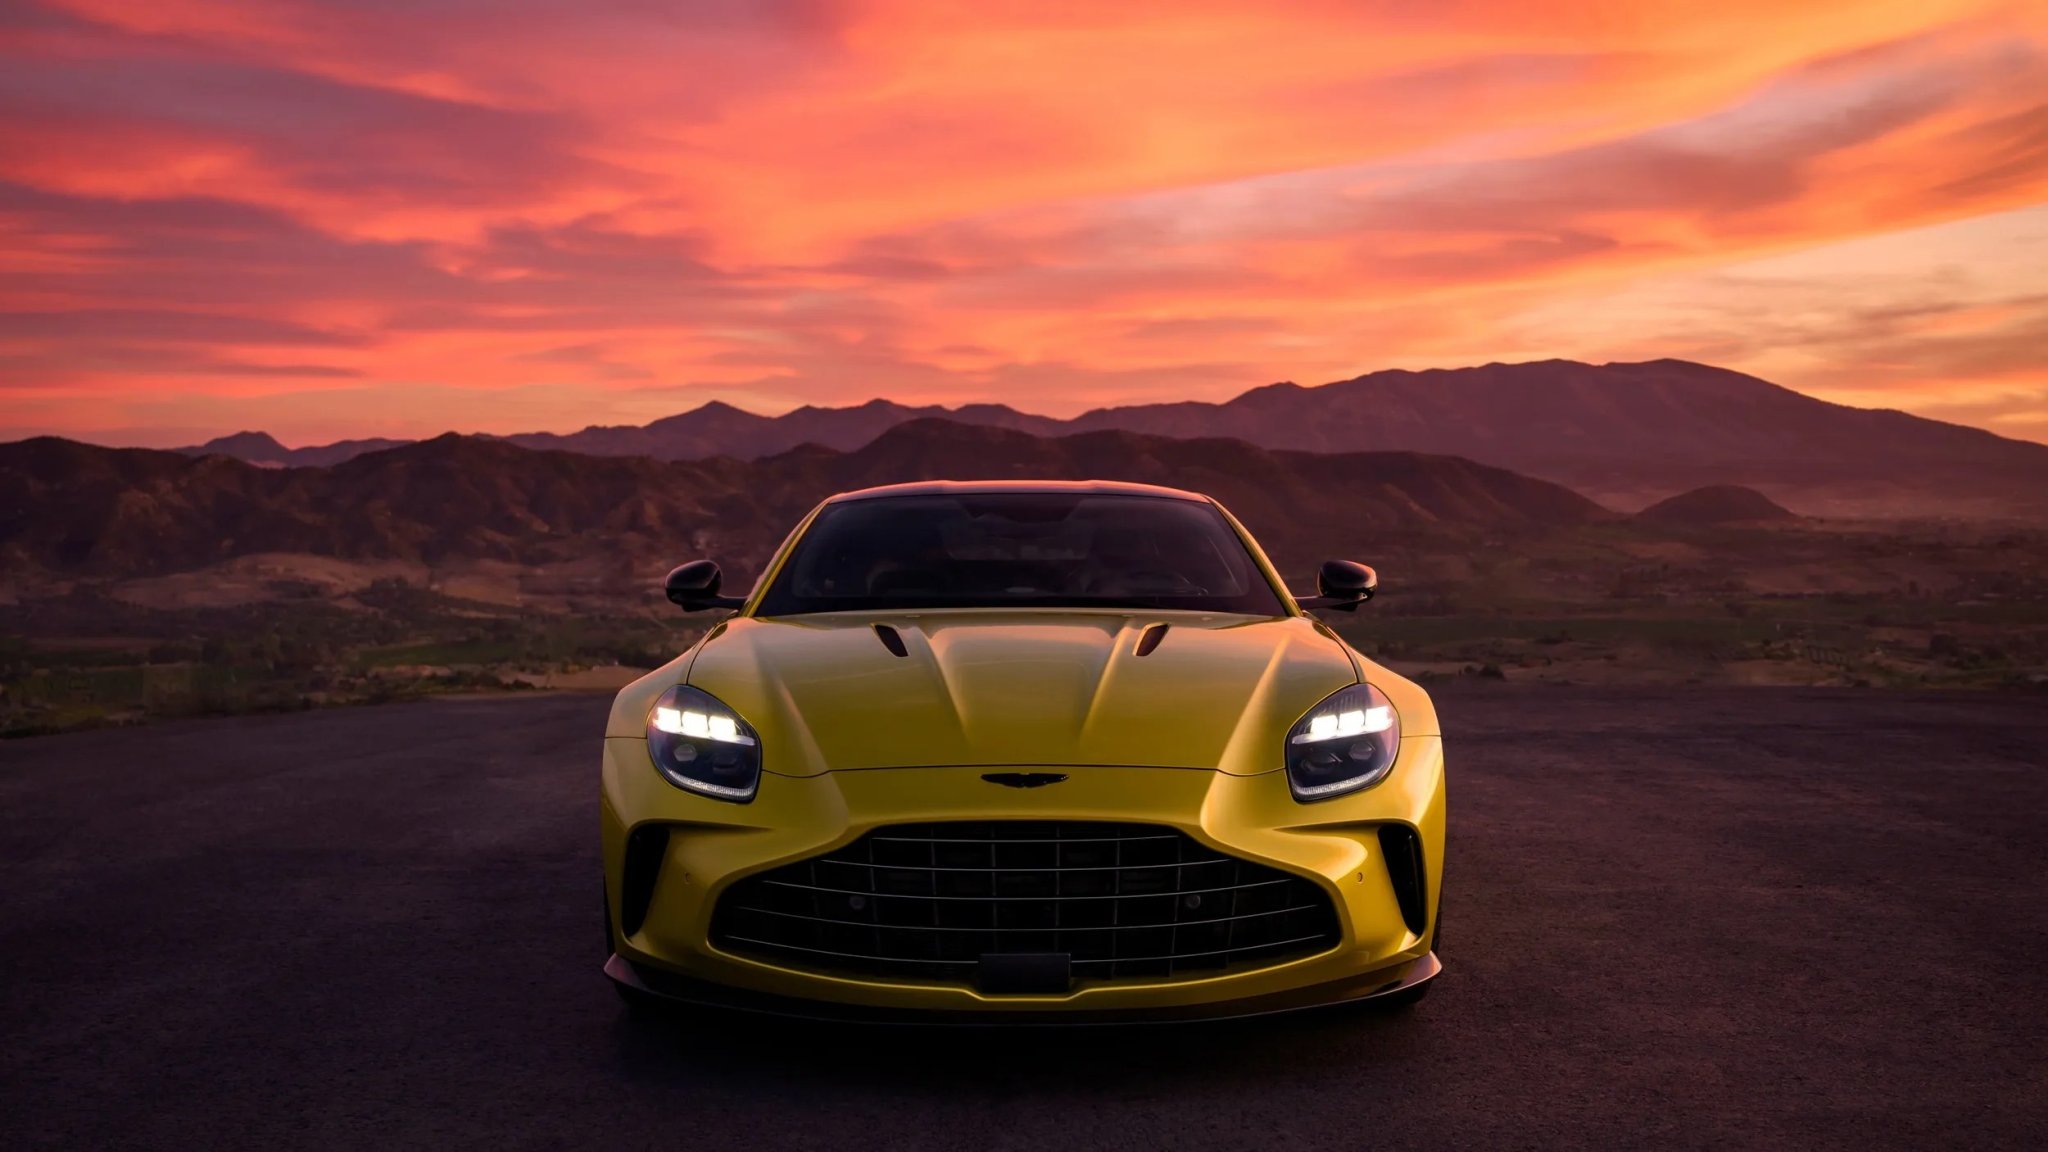 The 2025 Aston Martin Vantage: Better in Every Way